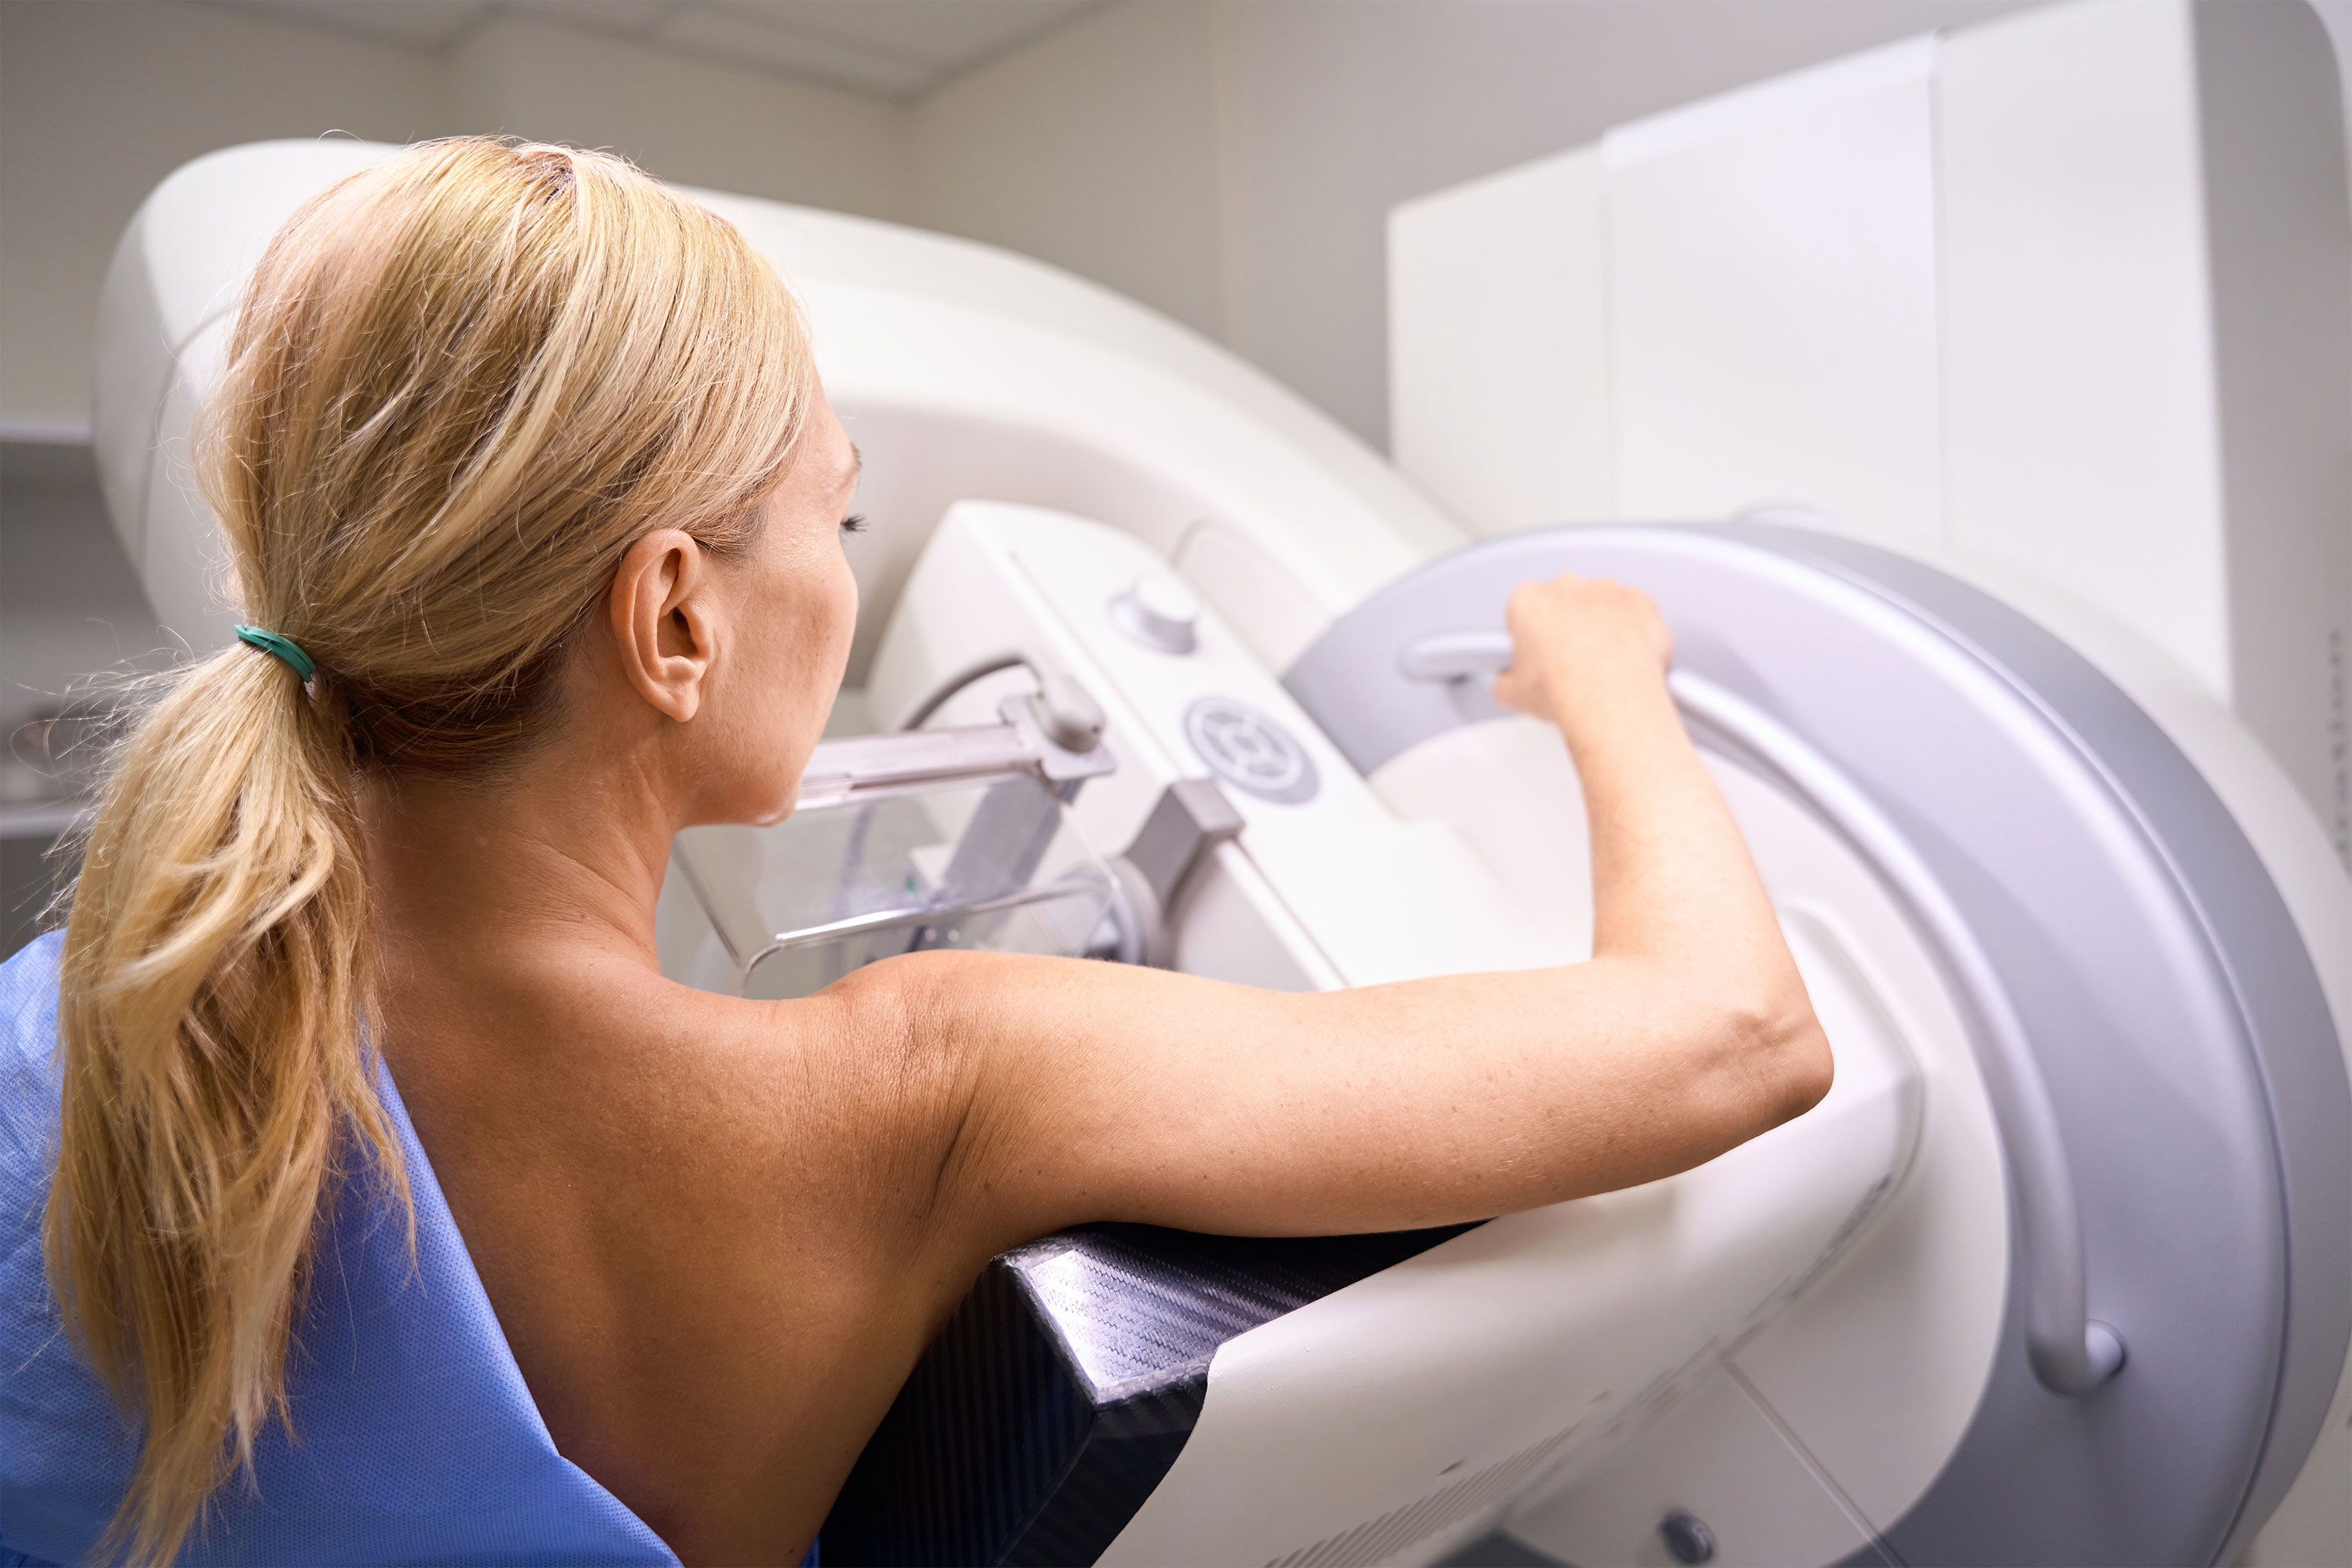 Screening vs. Diagnostic Mammograms: What's the Difference?